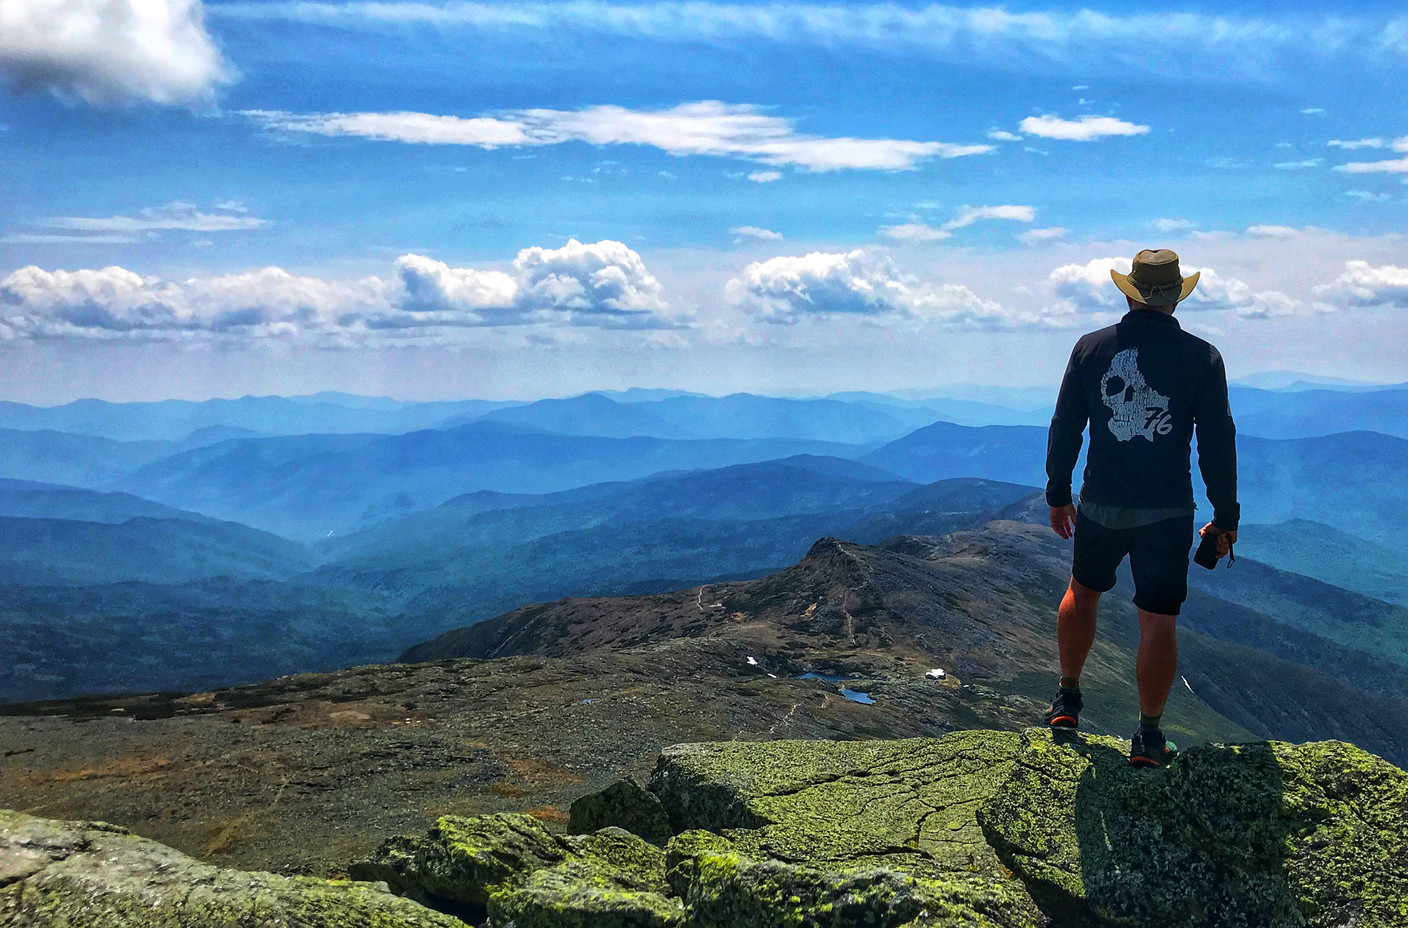 Luxembourger Guy Christen hiked America’s Appalachian Trail this year, fundraising for childhood cancer. Photo: Guy Christen